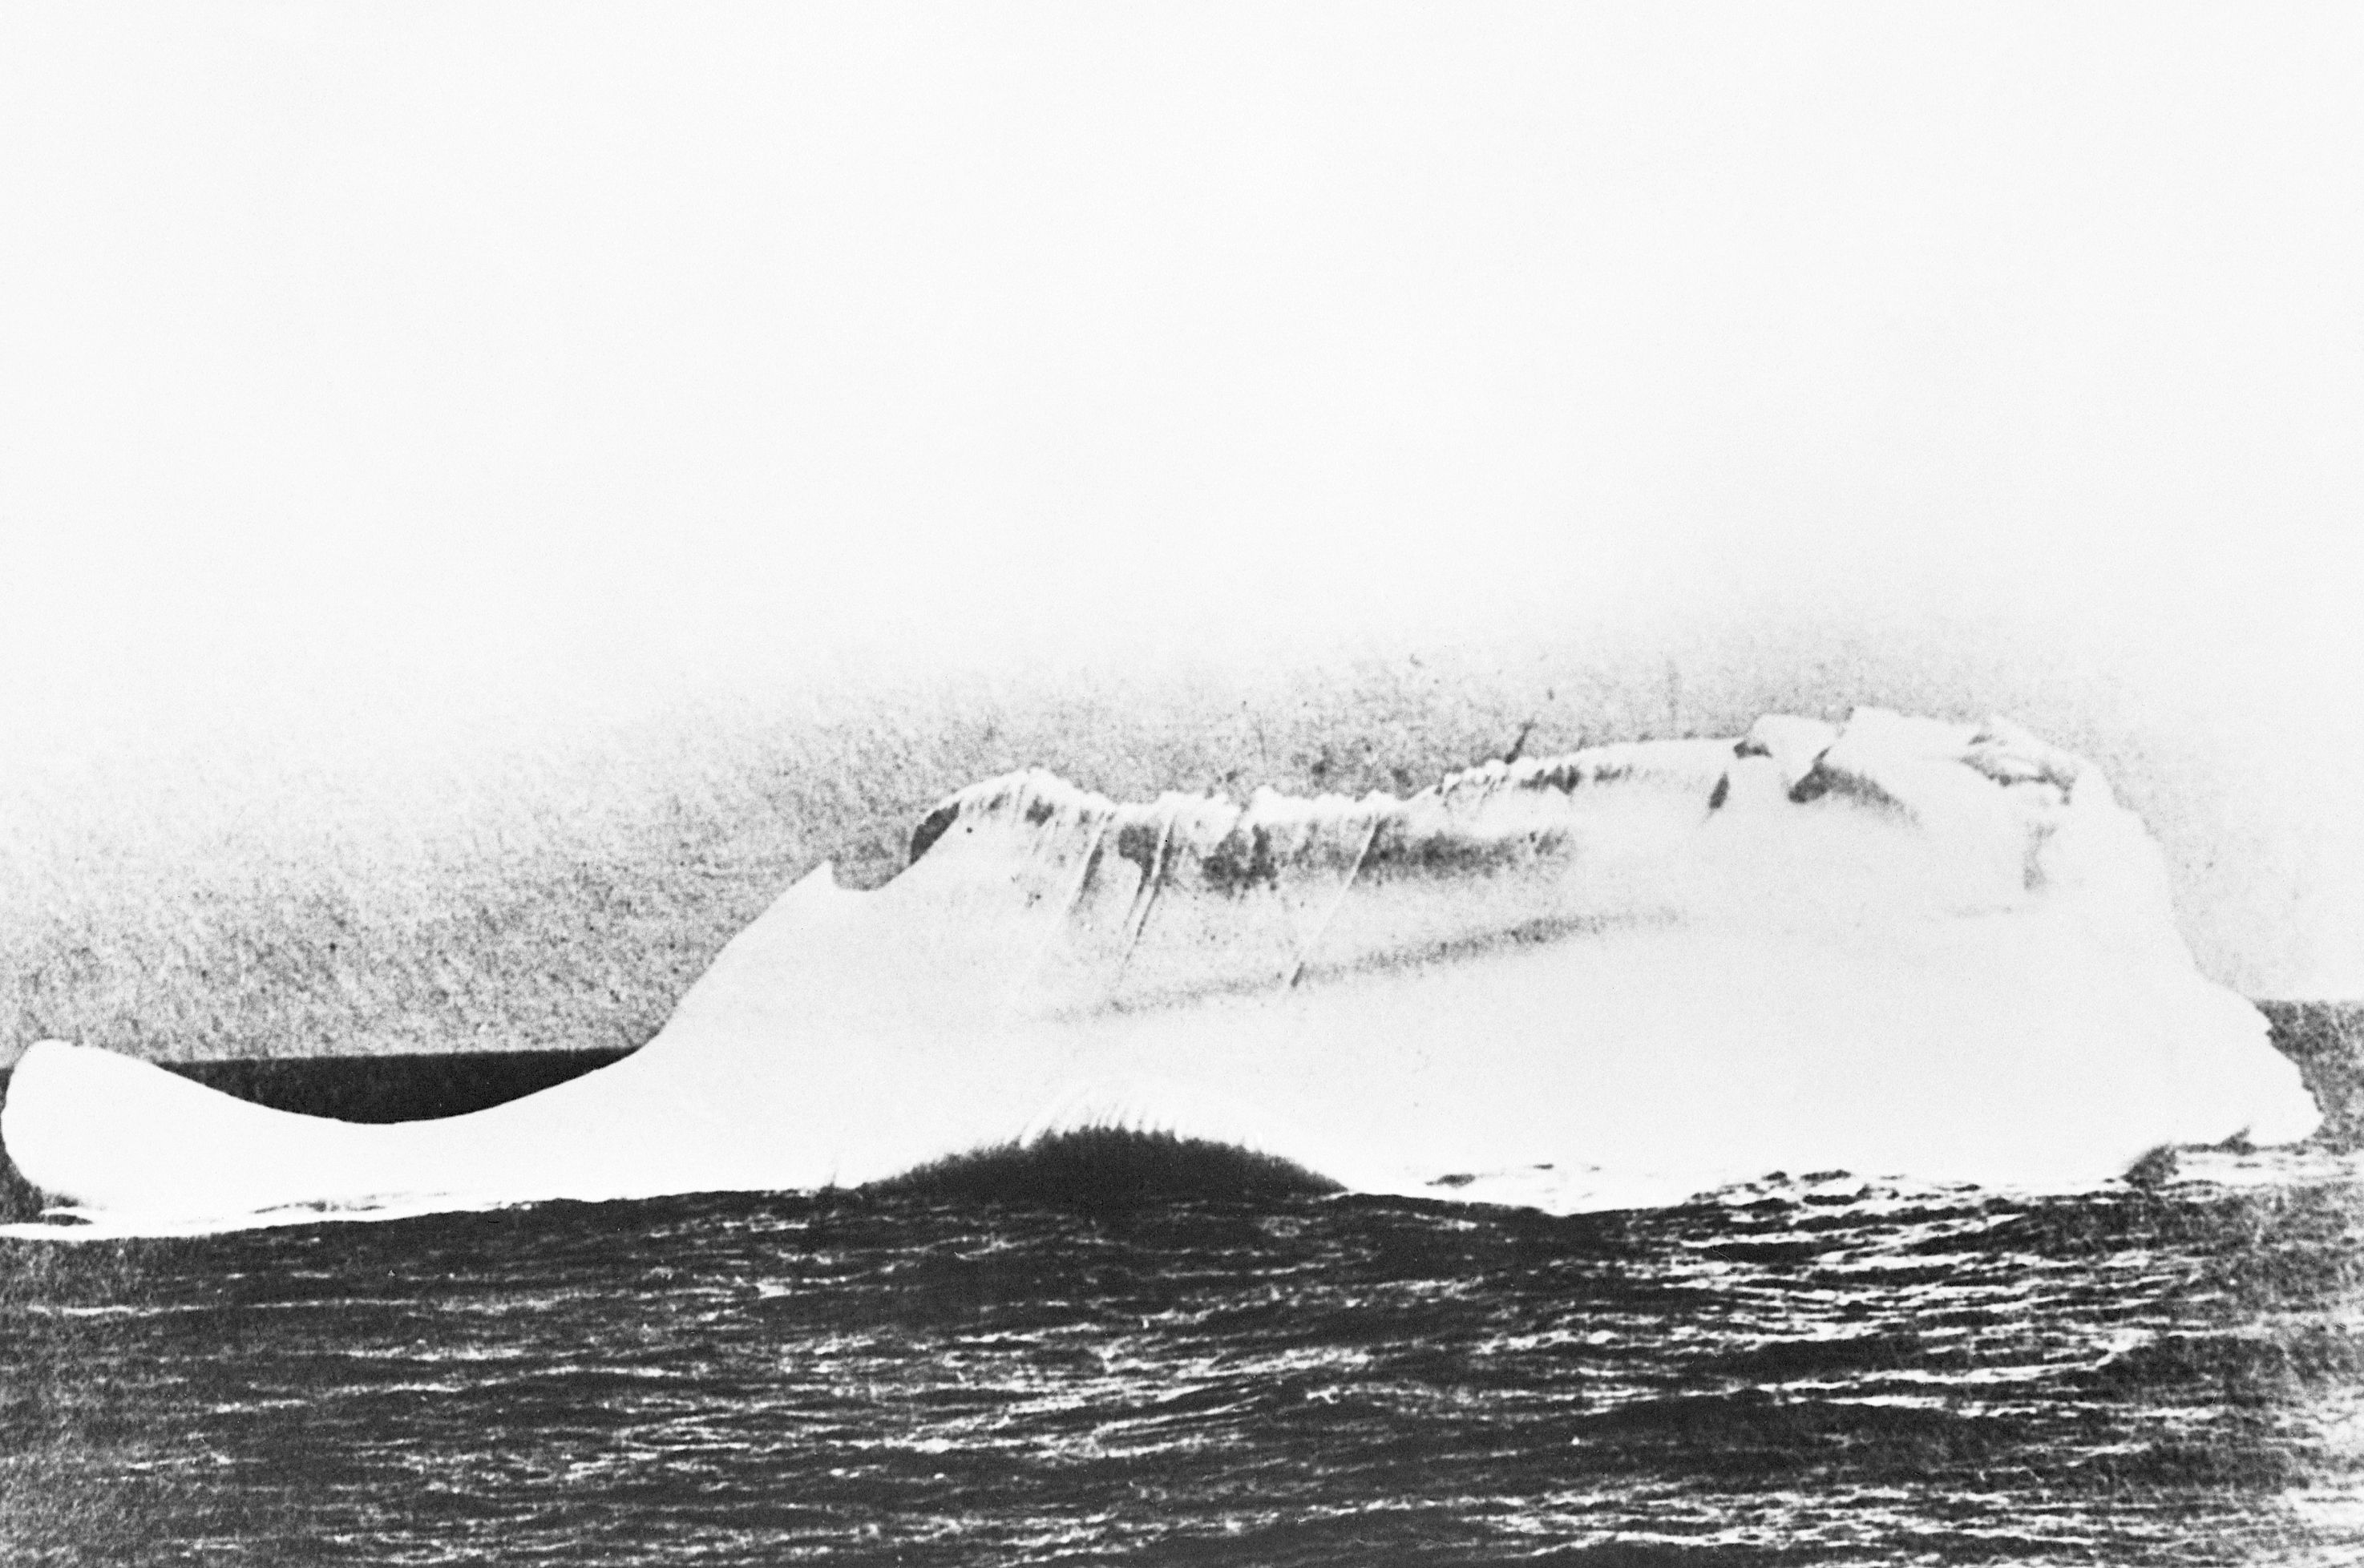 marxistisk gå ind kasseapparat Is This a Photo of the Iceberg That Sank the Titanic?